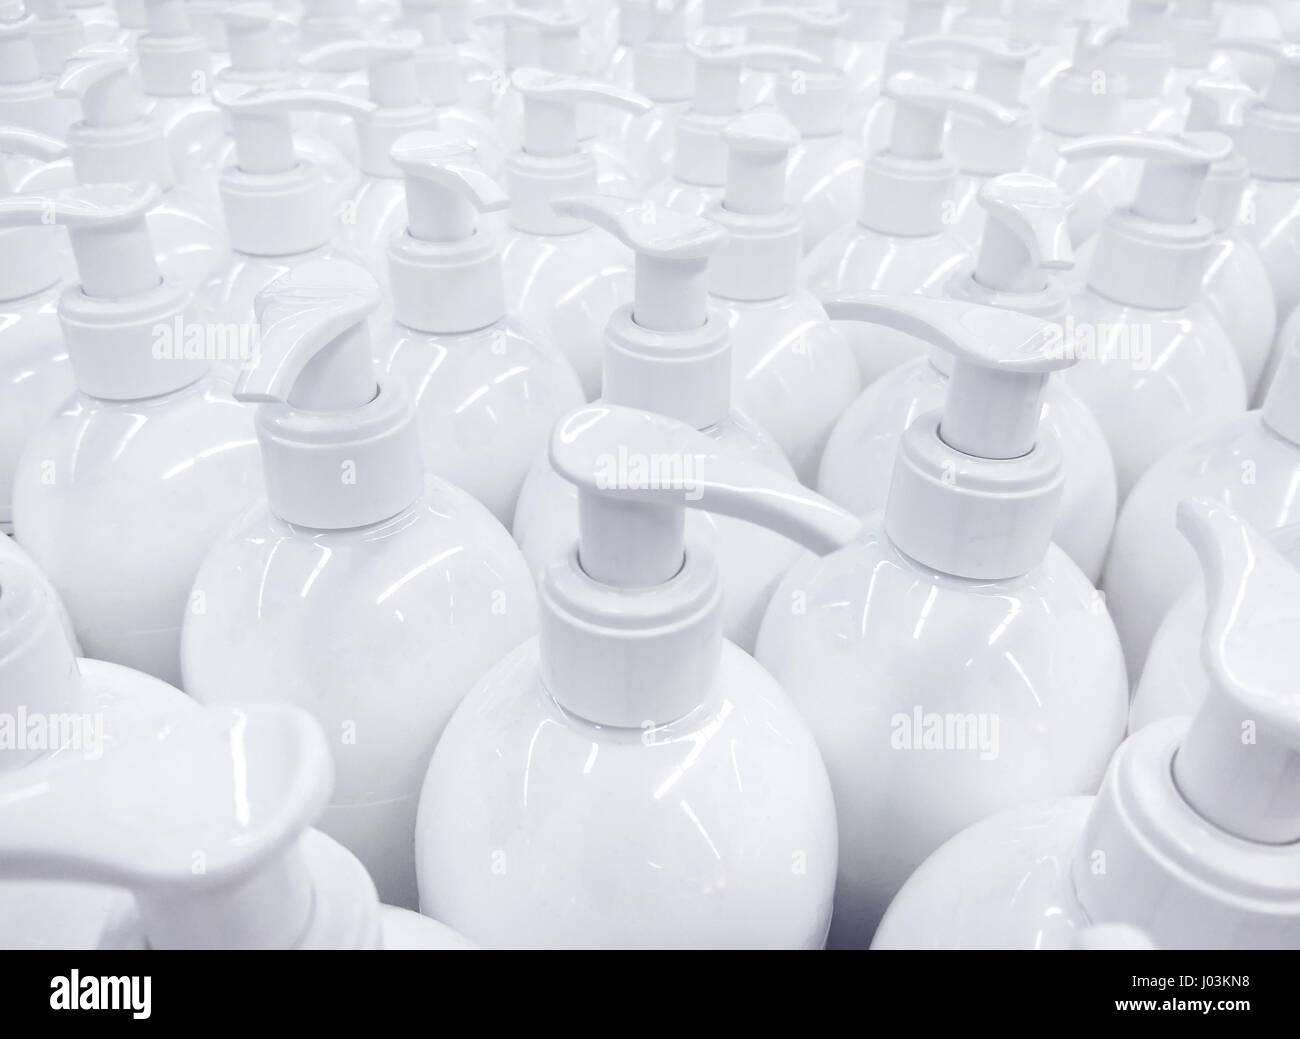 White unlabeled liquid soap bottles in supermarket, repeating pattern of large group of plastic containers for hygiene product Stock Photo